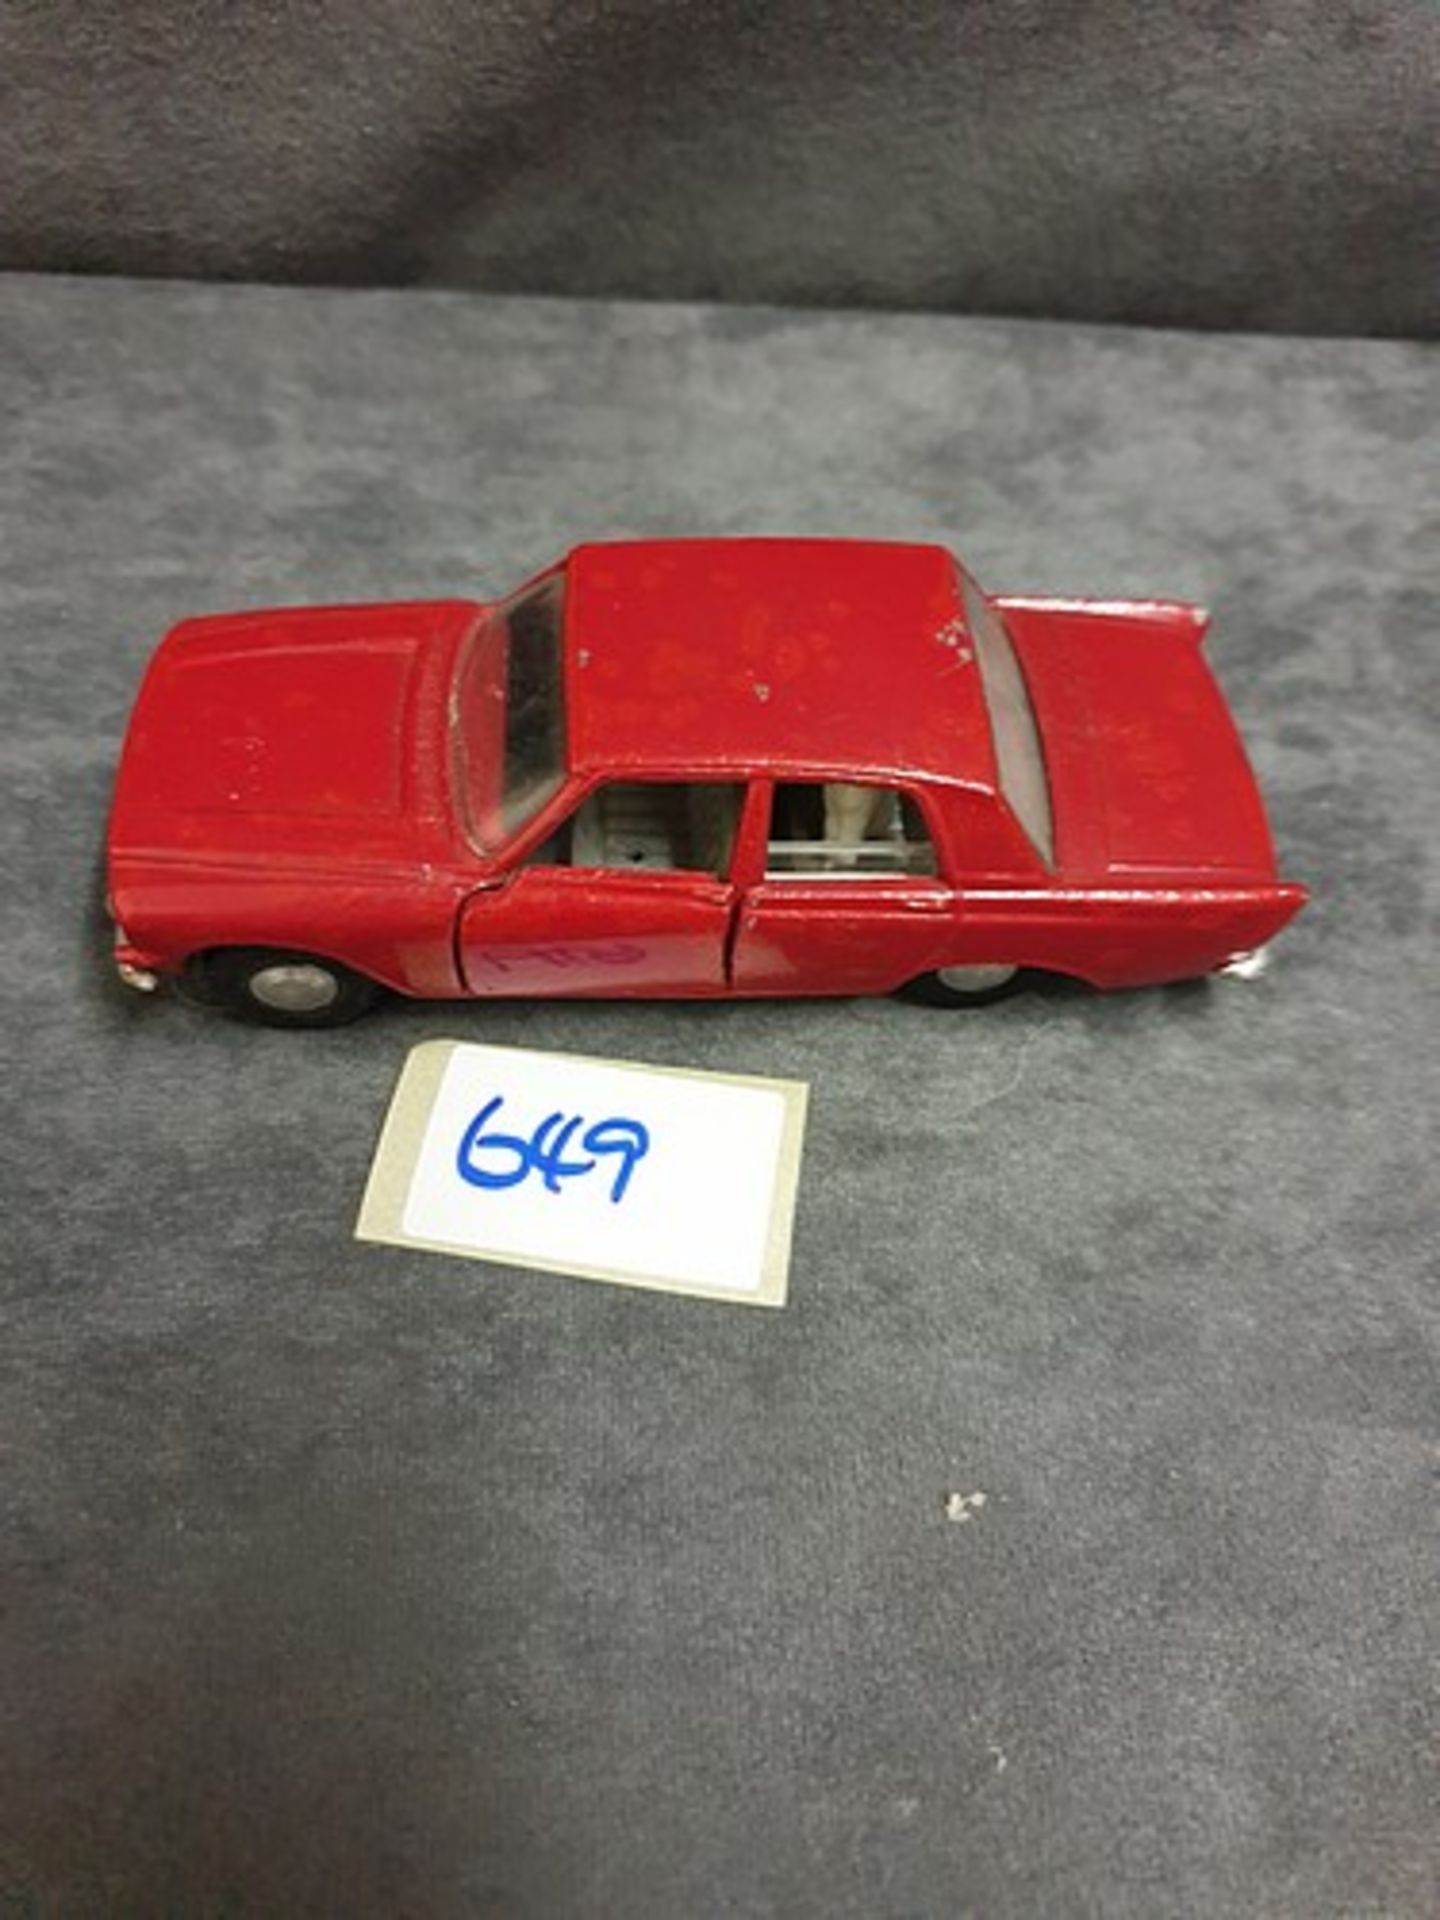 Spot-On By Tri-Ang Models Diecast #270 Ford Zepher Six In Red Model Has Some Chips And Has Been